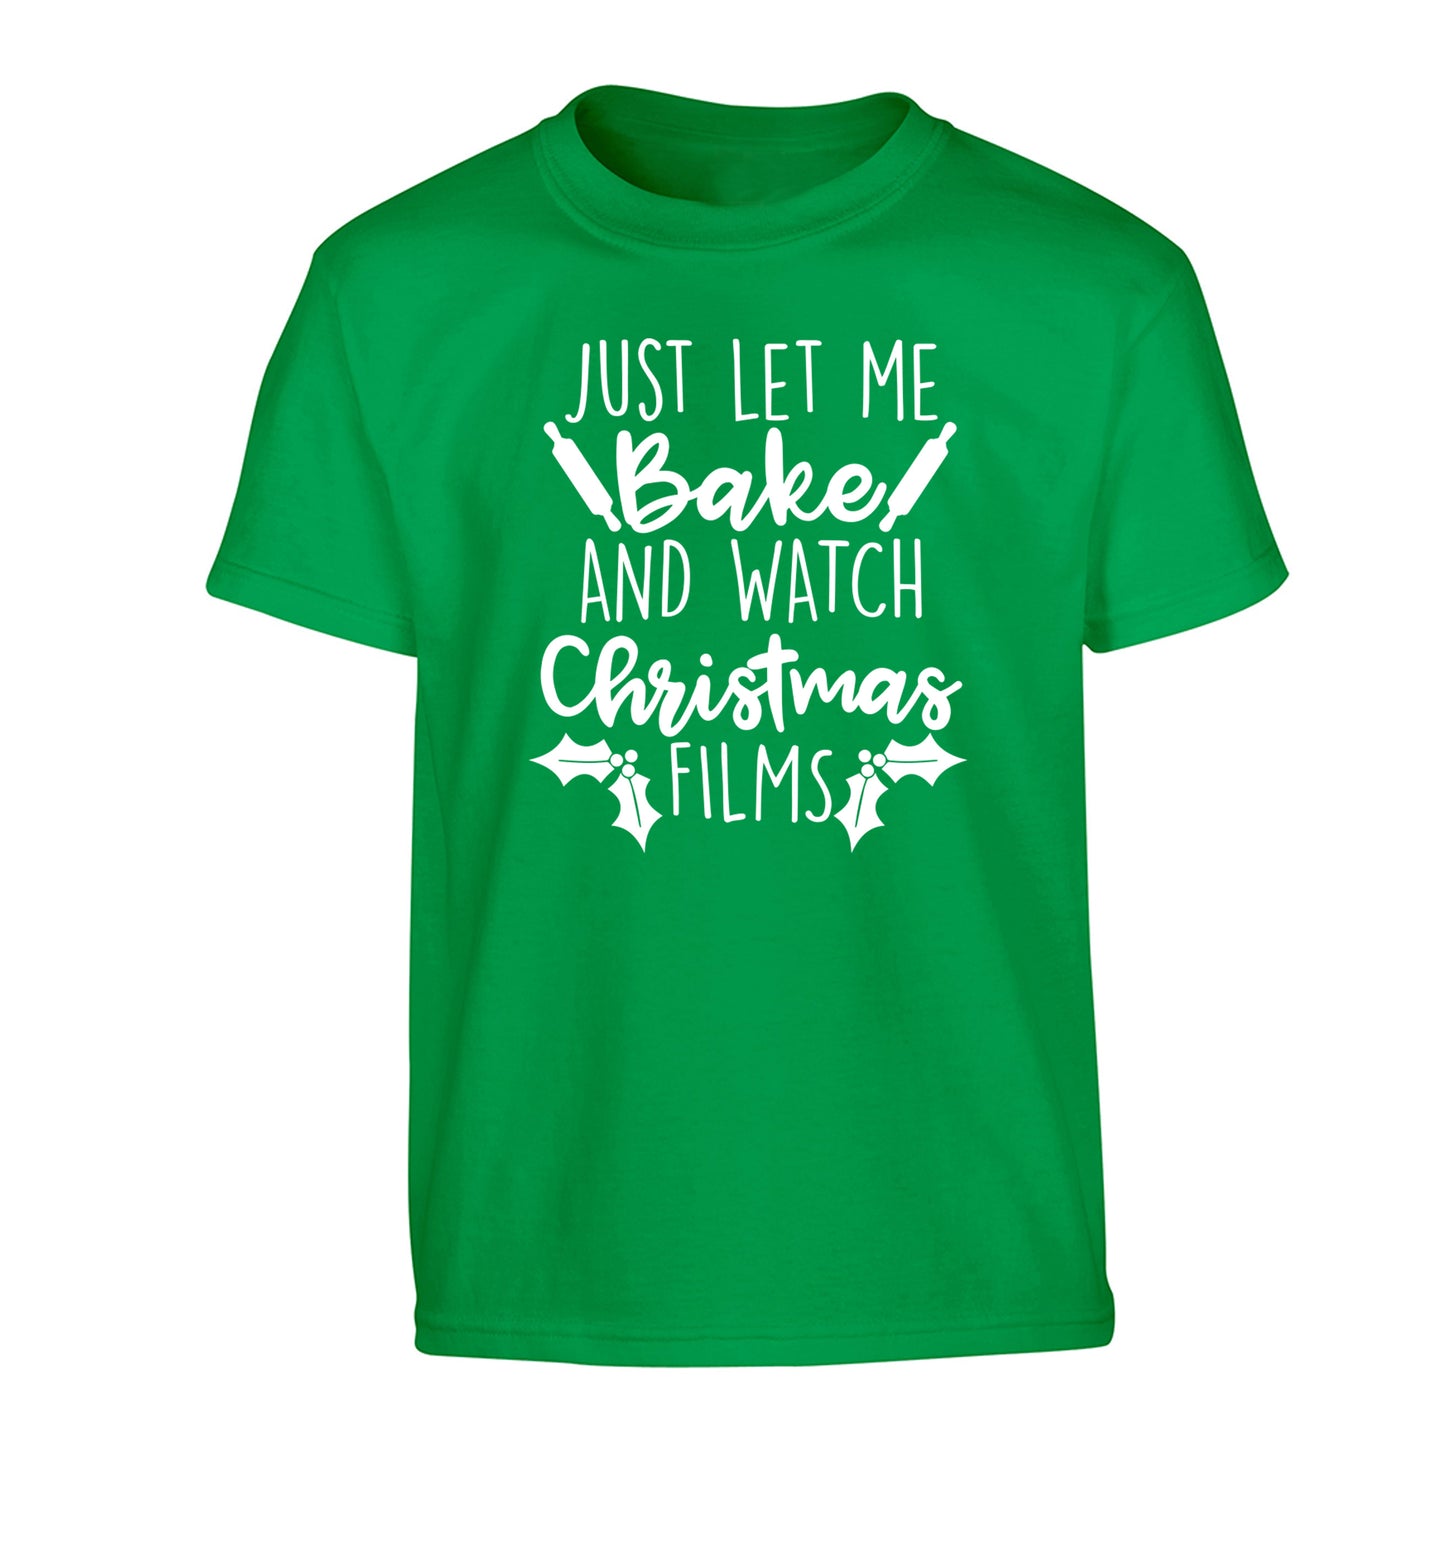 Just let me bake and watch Christmas films Children's green Tshirt 12-14 Years